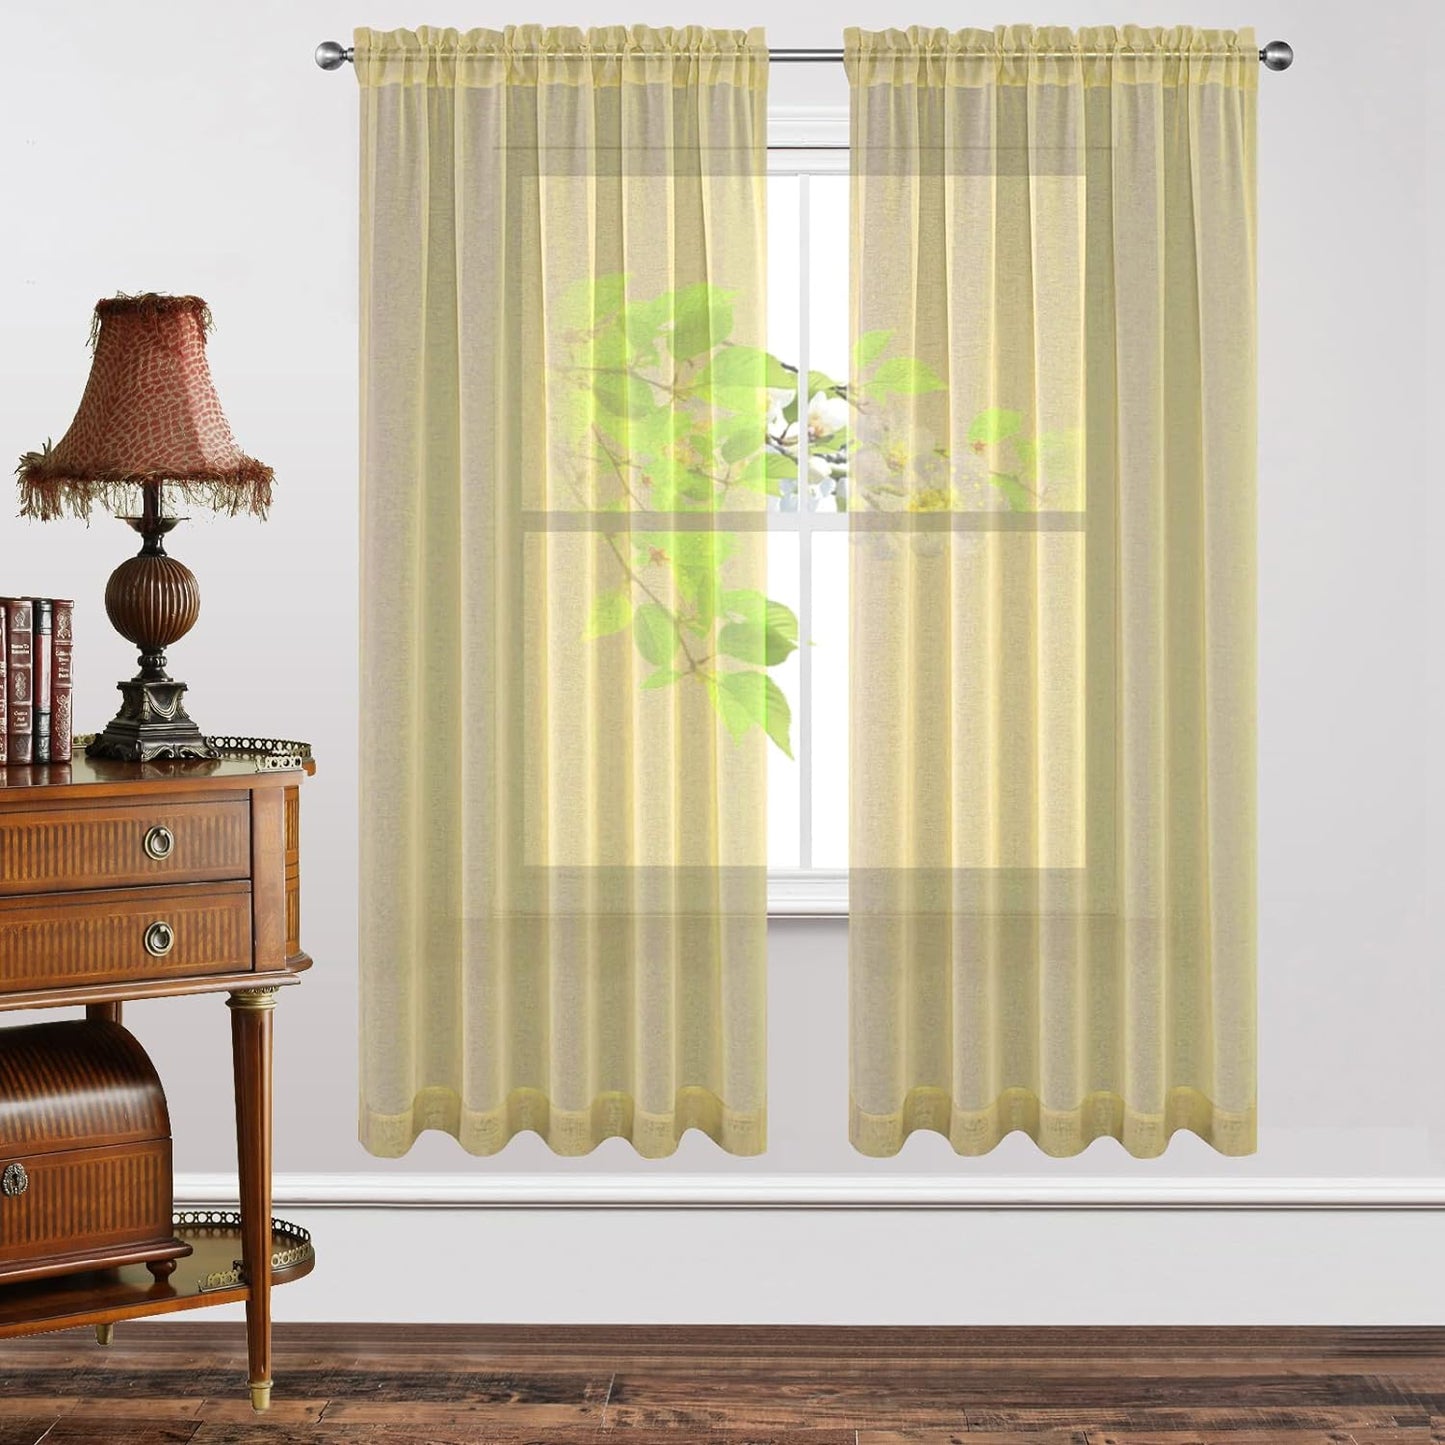 Joydeco White Sheer Curtains 63 Inch Length 2 Panels Set, Rod Pocket Long Sheer Curtains for Window Bedroom Living Room, Lightweight Semi Drape Panels for Yard Patio (54X63 Inch, off White)  Joydeco Yellow 54W X 72L Inch X 2 Panels 